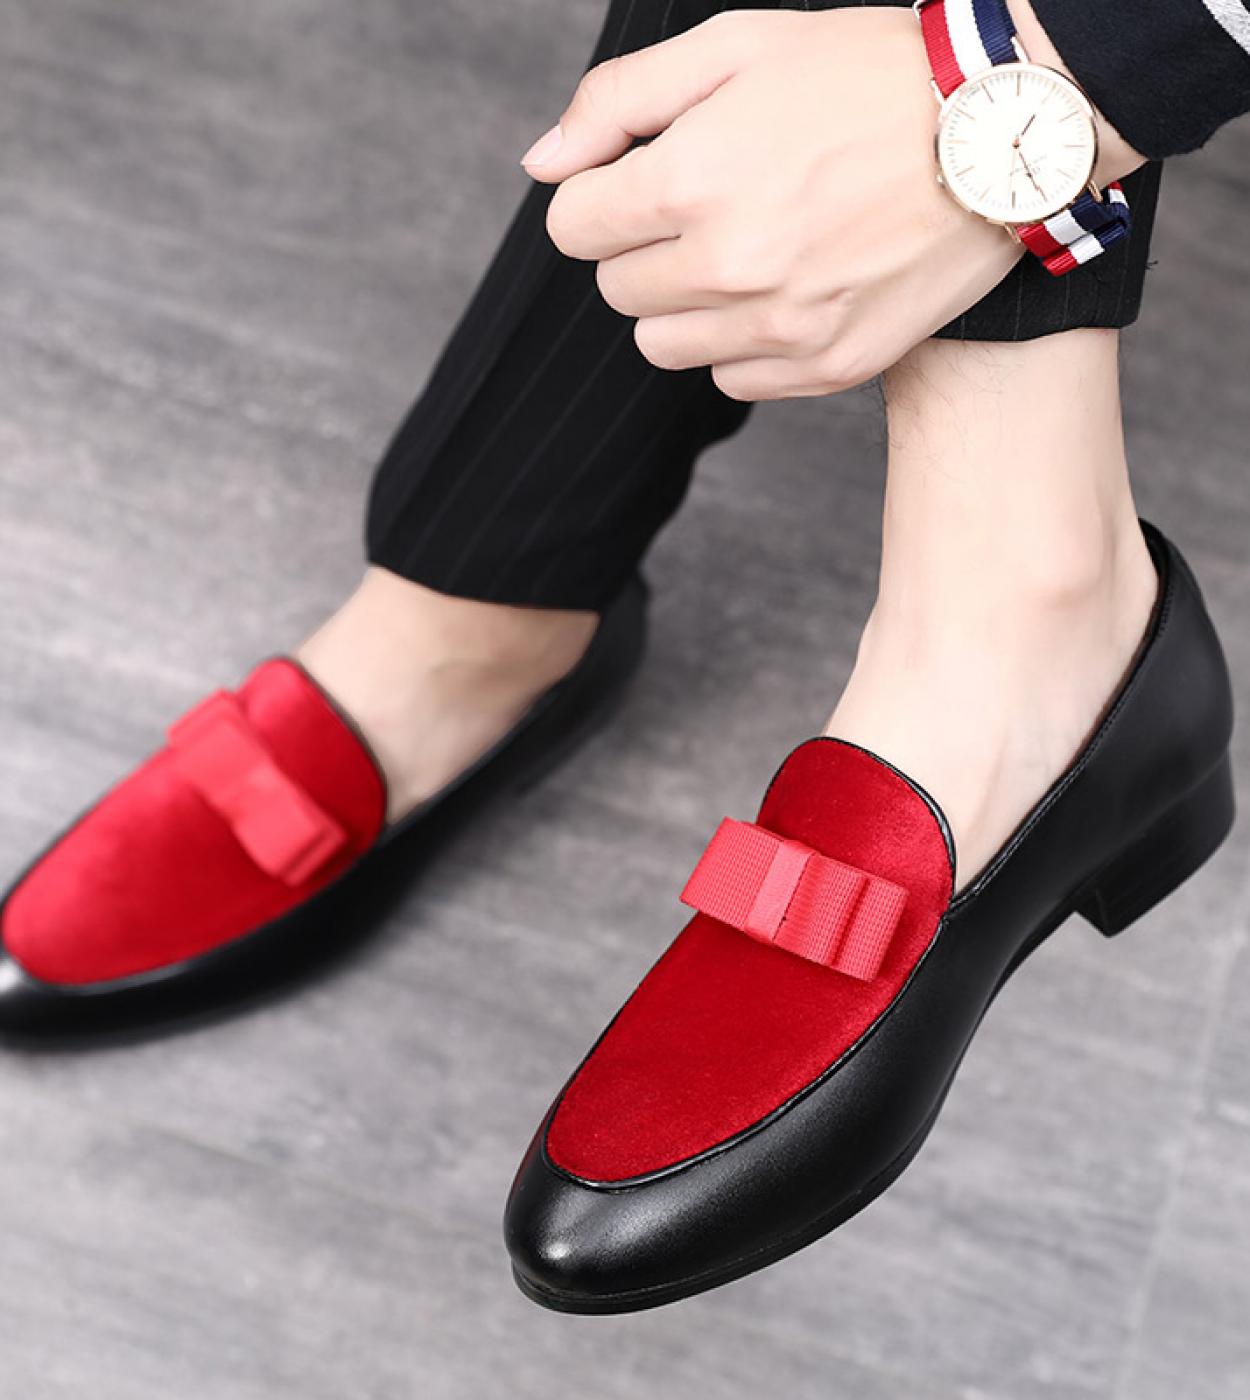 Luxury Bowknot Dress Shoes Male Loafers Black Patent Leather Red Suede Loafers Men Formal Wedding Shoes Men Formal Leath